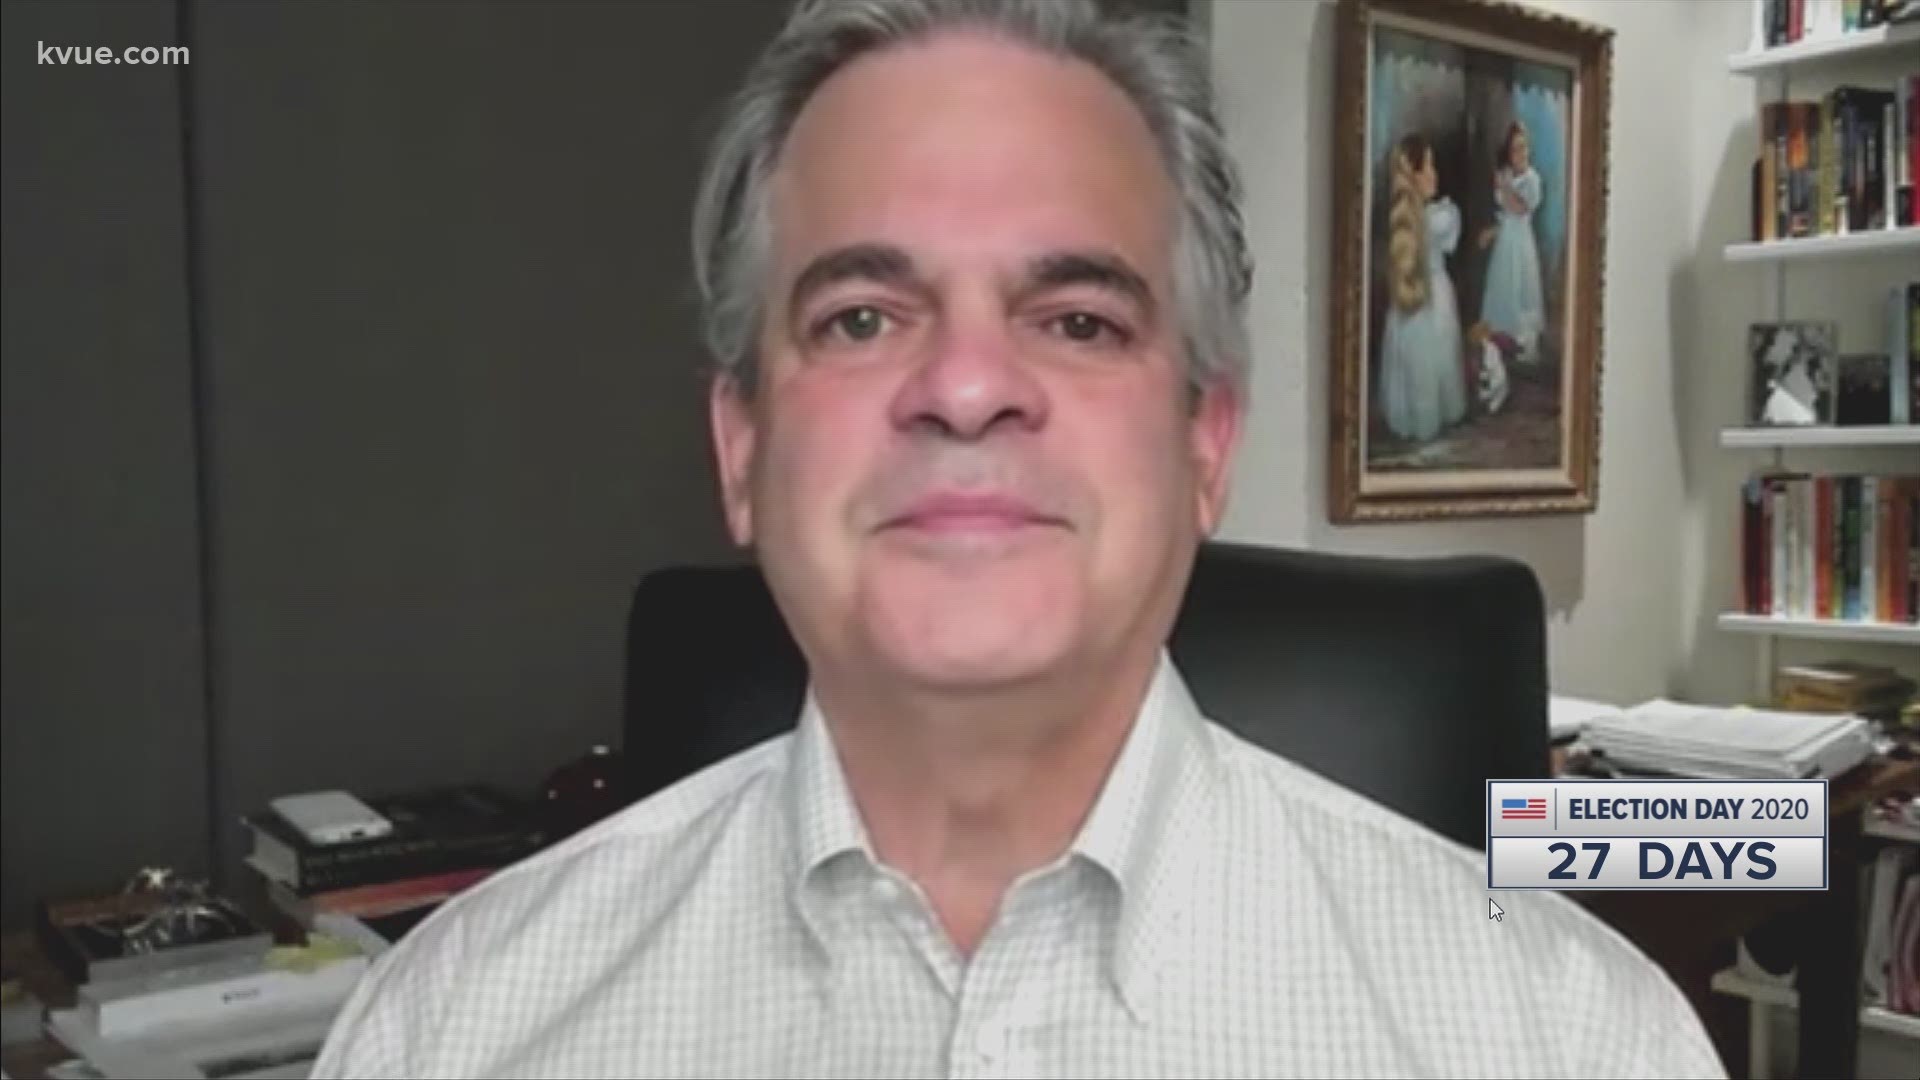 Mayor Adler joined KVUE to talk about Gov. Abbott’s announcement on reopening more businesses.